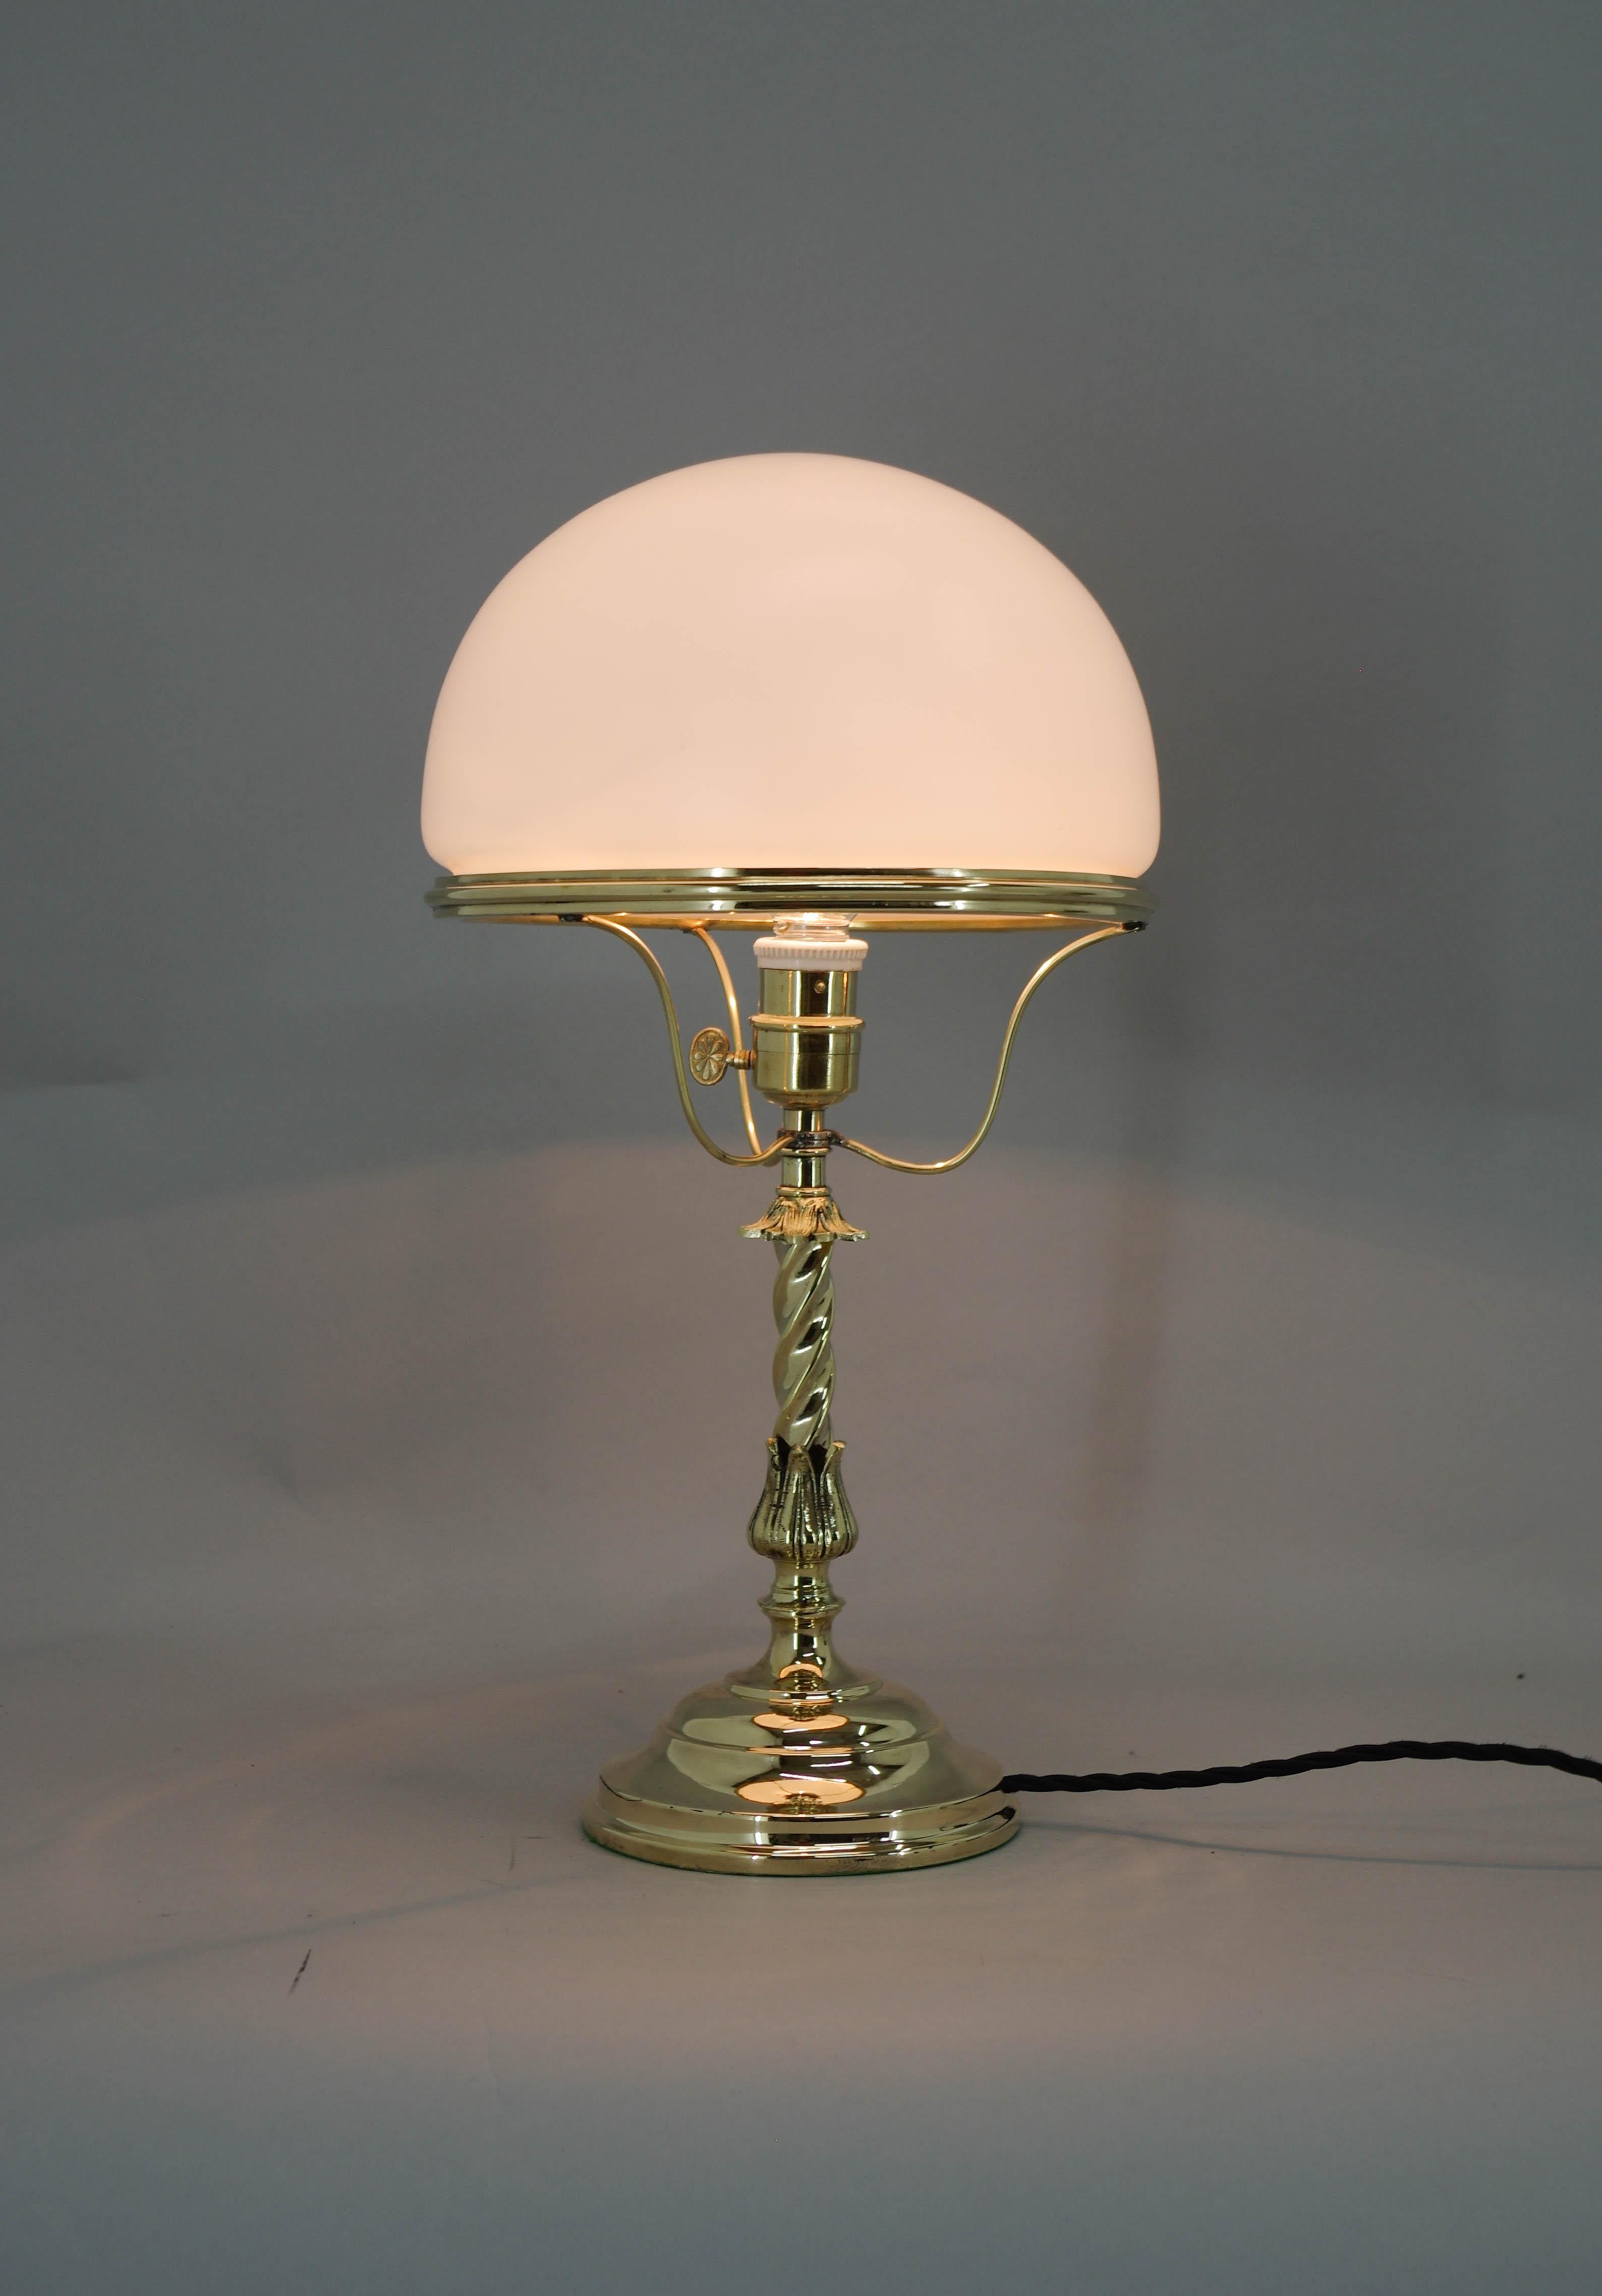 Art Nouveau table lamp made in Austria in 1910s.
Restored: cleaned, polished, rewired
1x40W, E25-E27 bulb
US plug adapter included